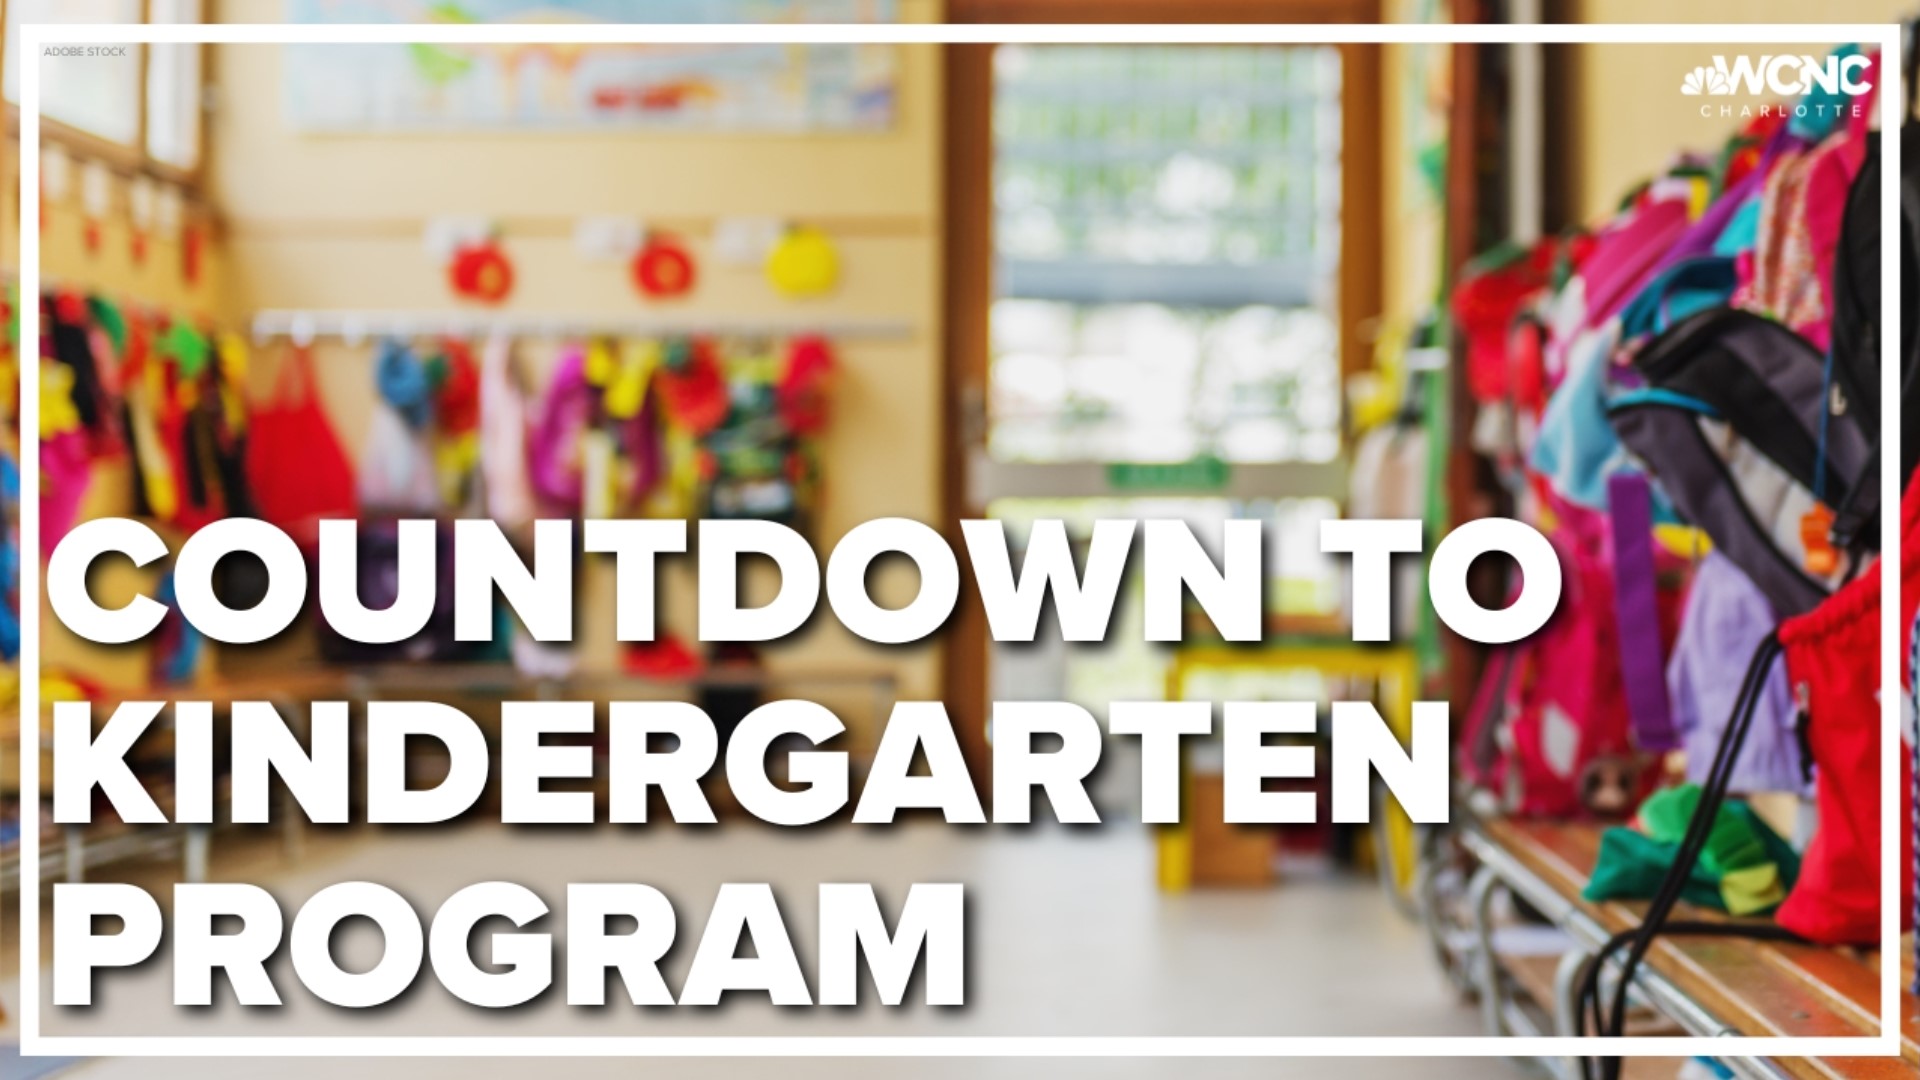 School is out, but the summer learning continues in South Carolina as part of the Countdown to Kindergarten program.